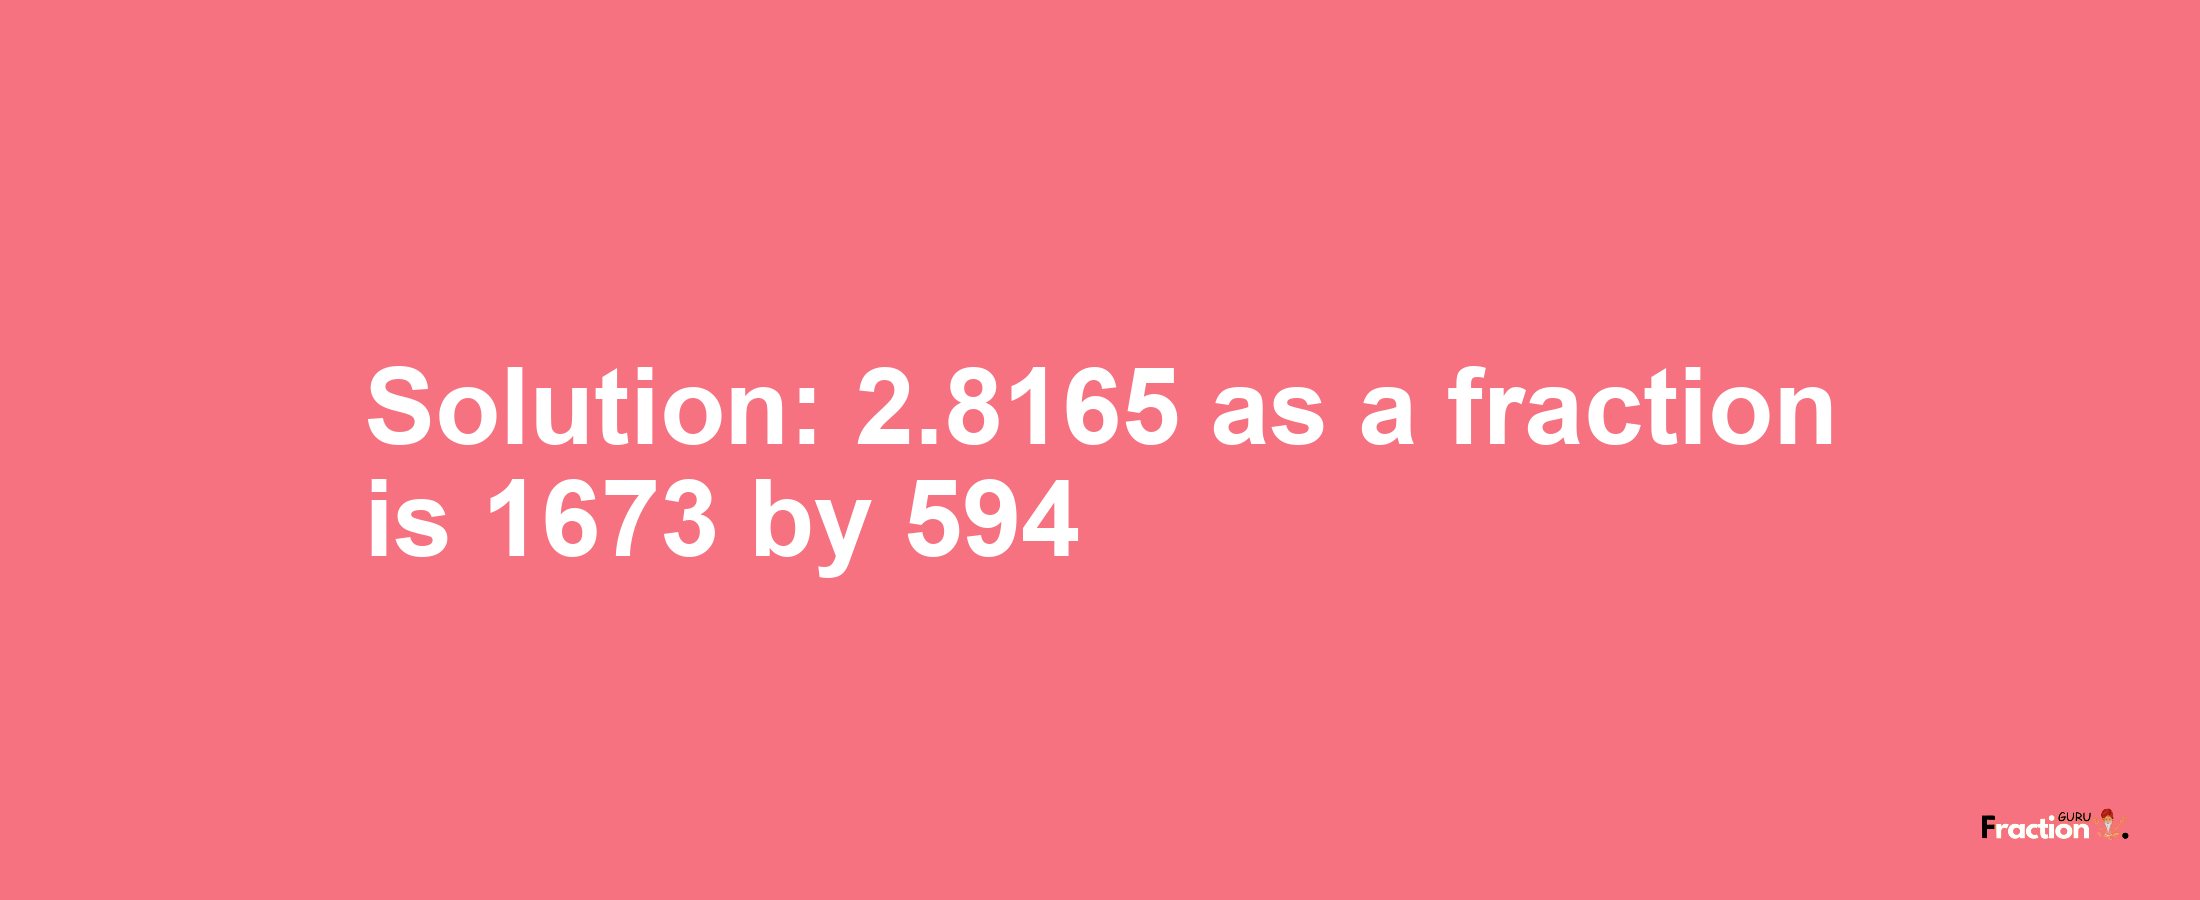 Solution:2.8165 as a fraction is 1673/594